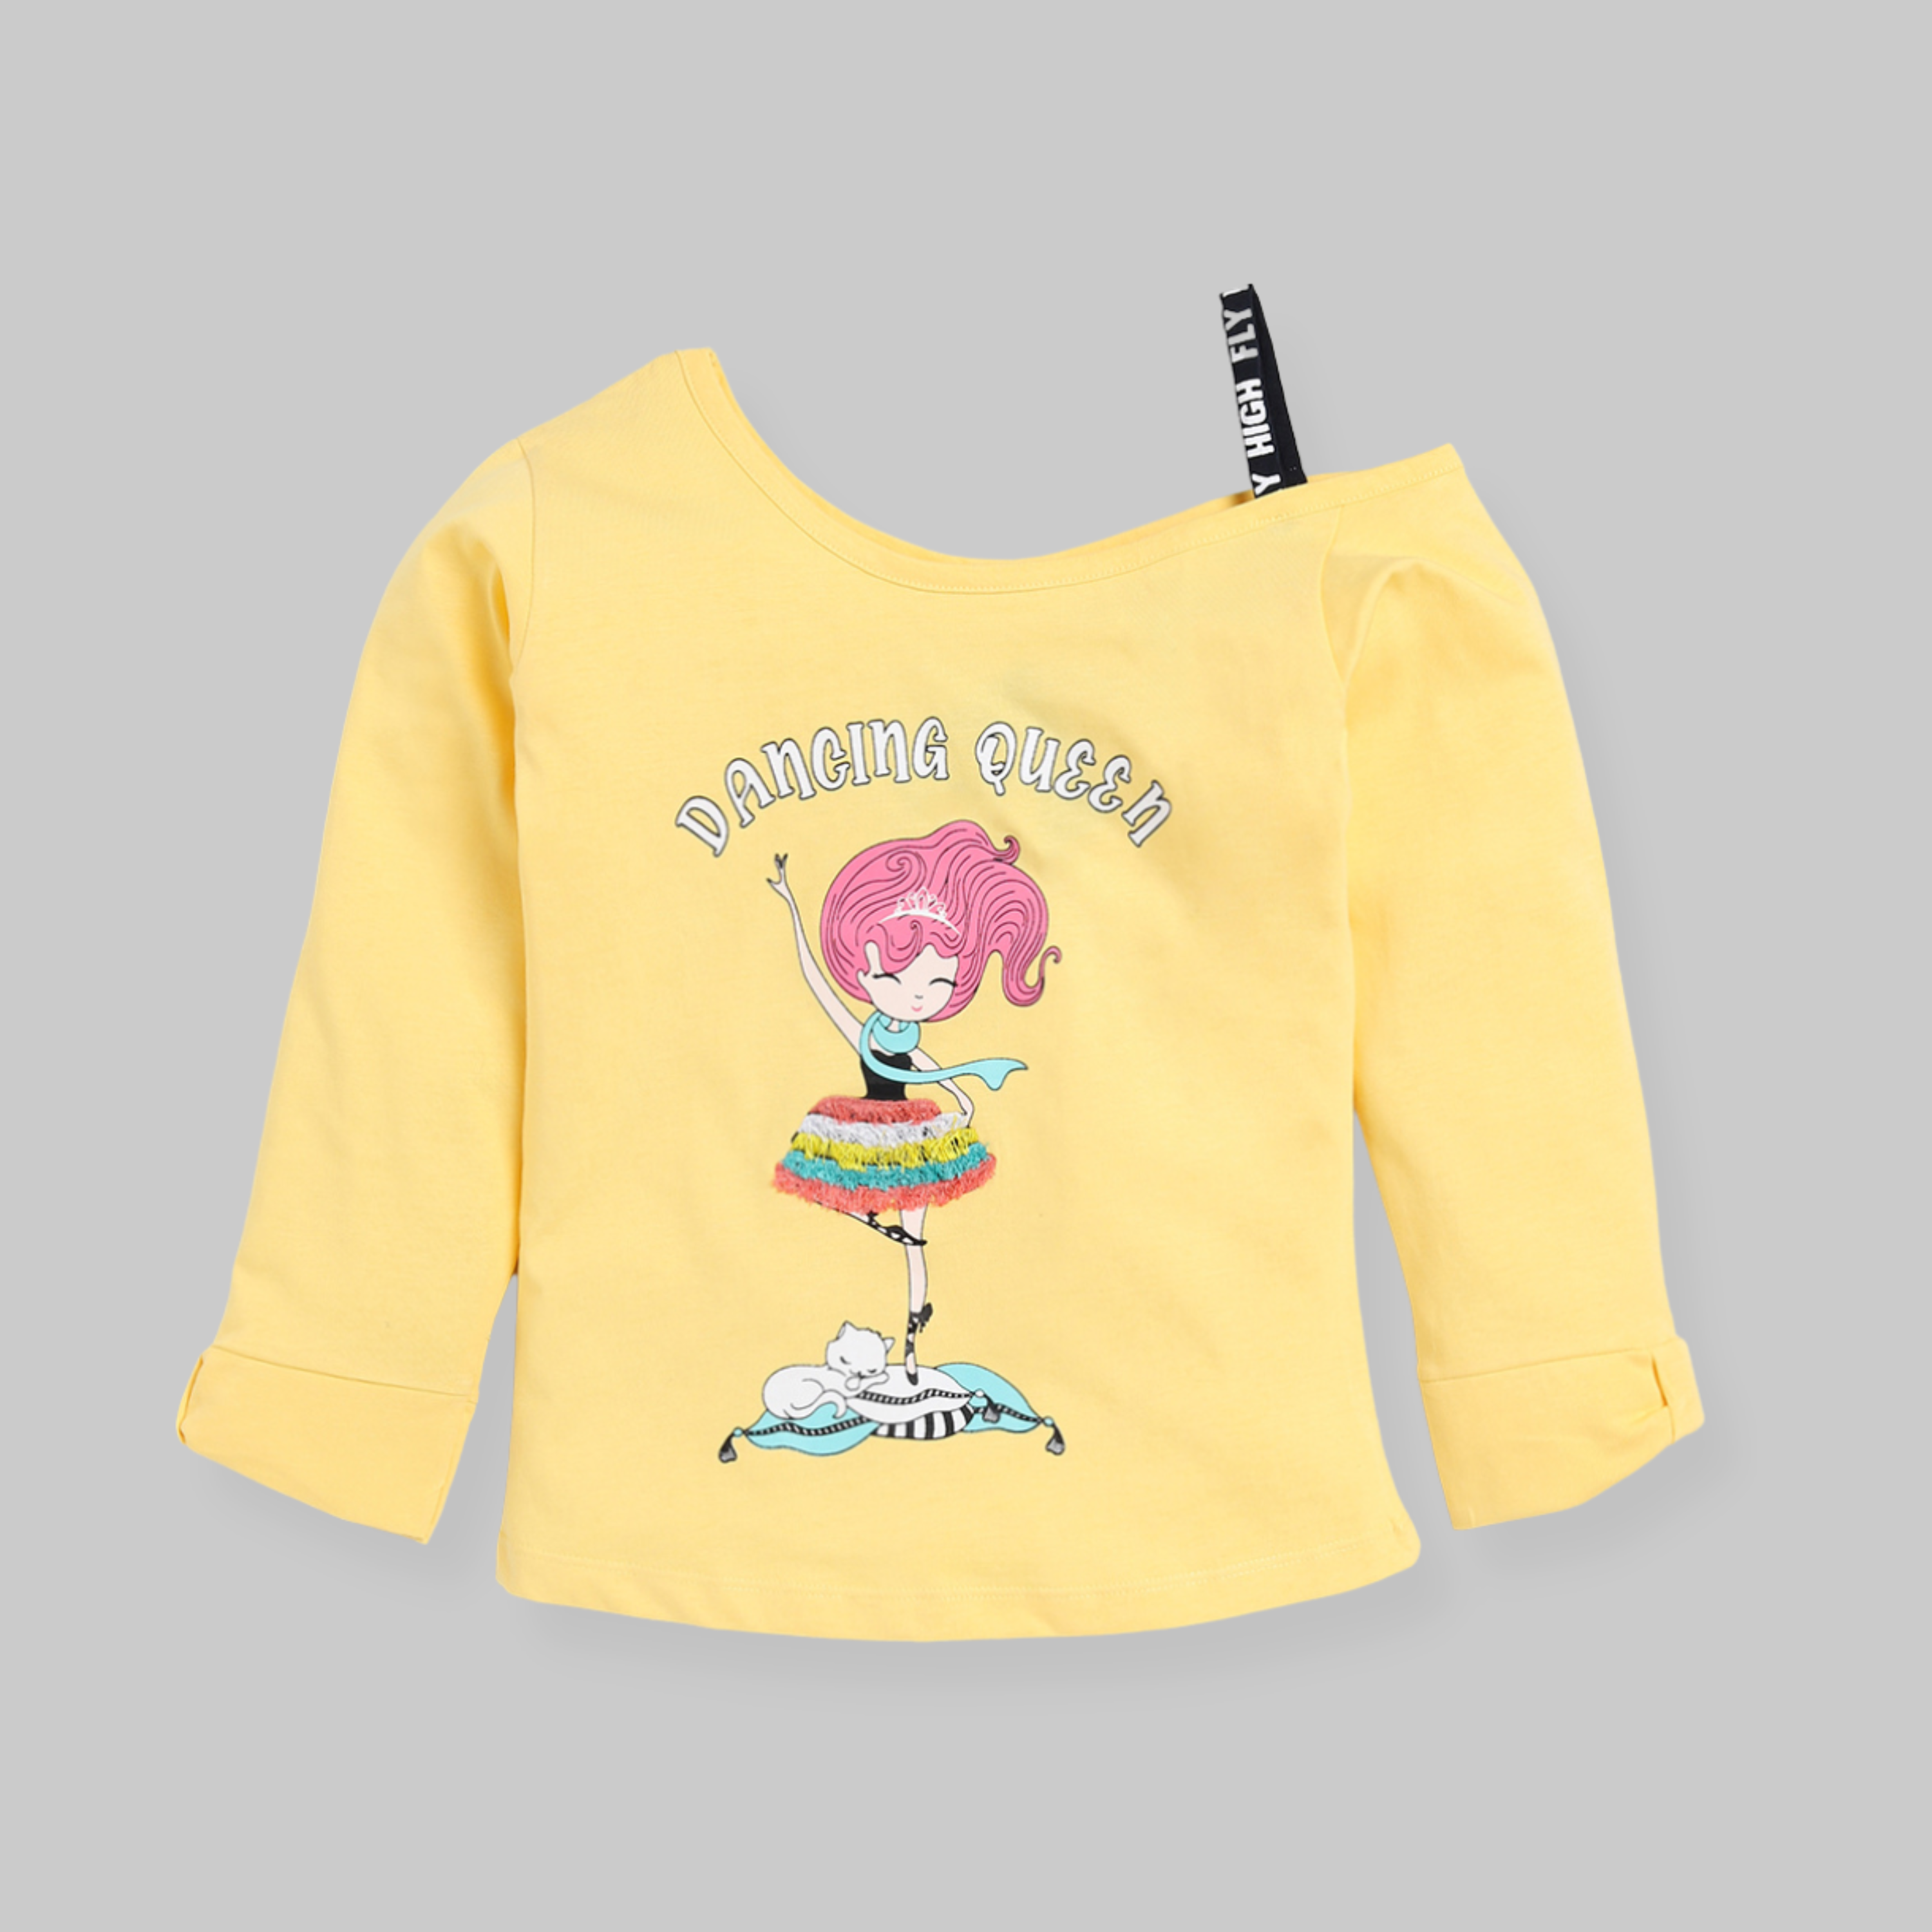 Full Sleeve Printed Top for Girls - Yellow